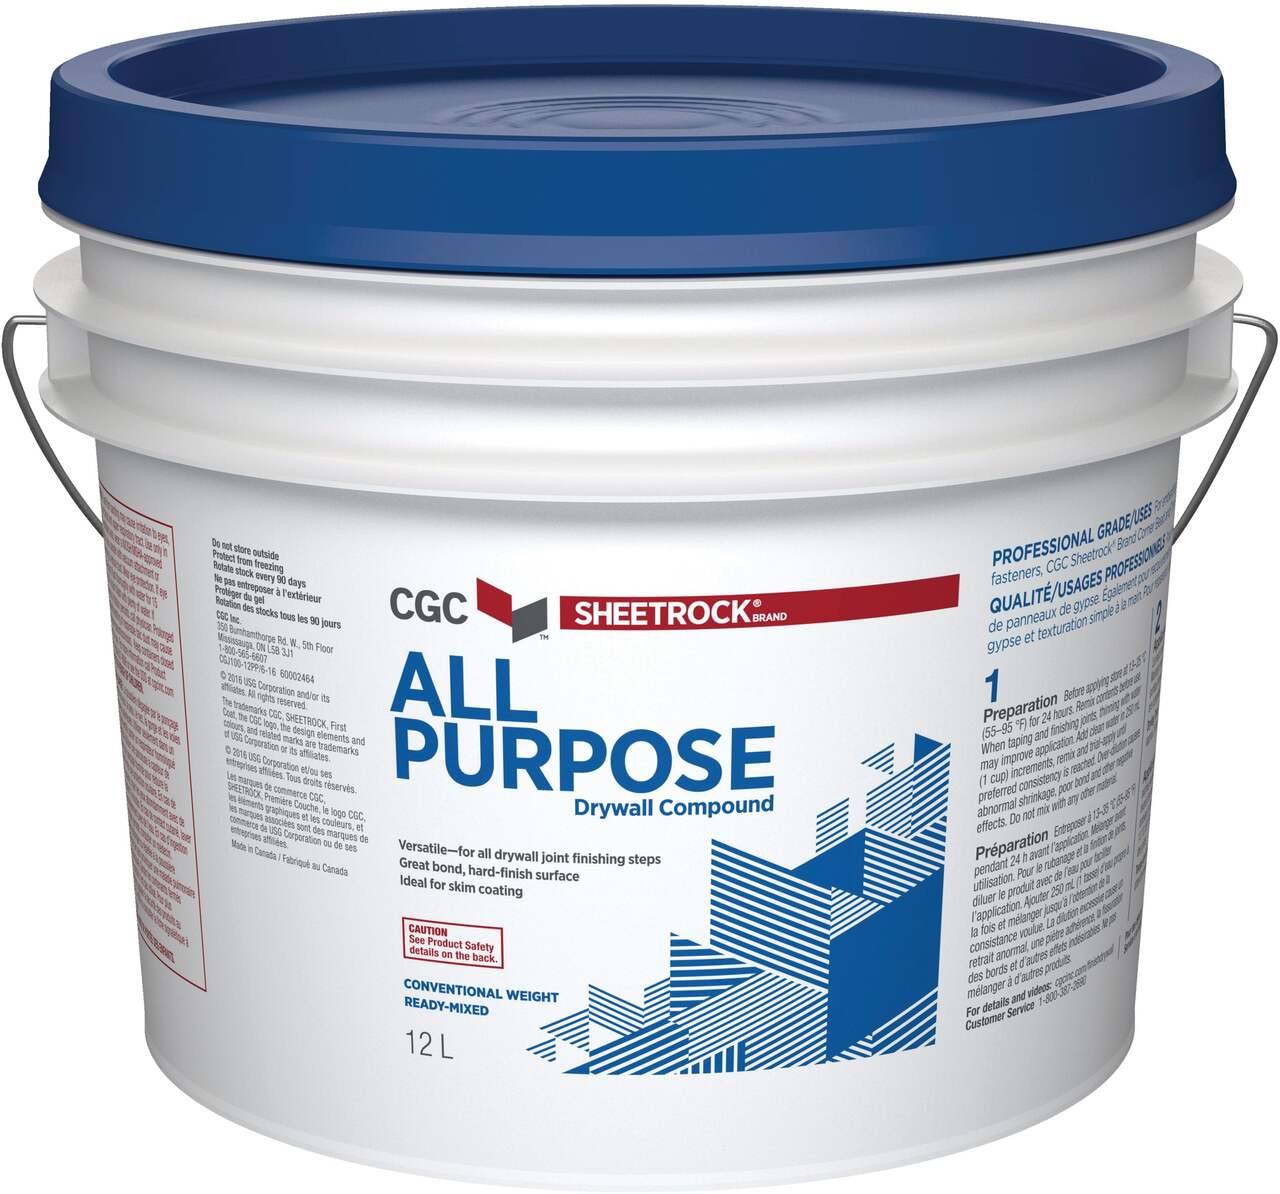 CGC Sheetrock All-Purpose Ready-Mixed Drywall Compound, 12-L Pail